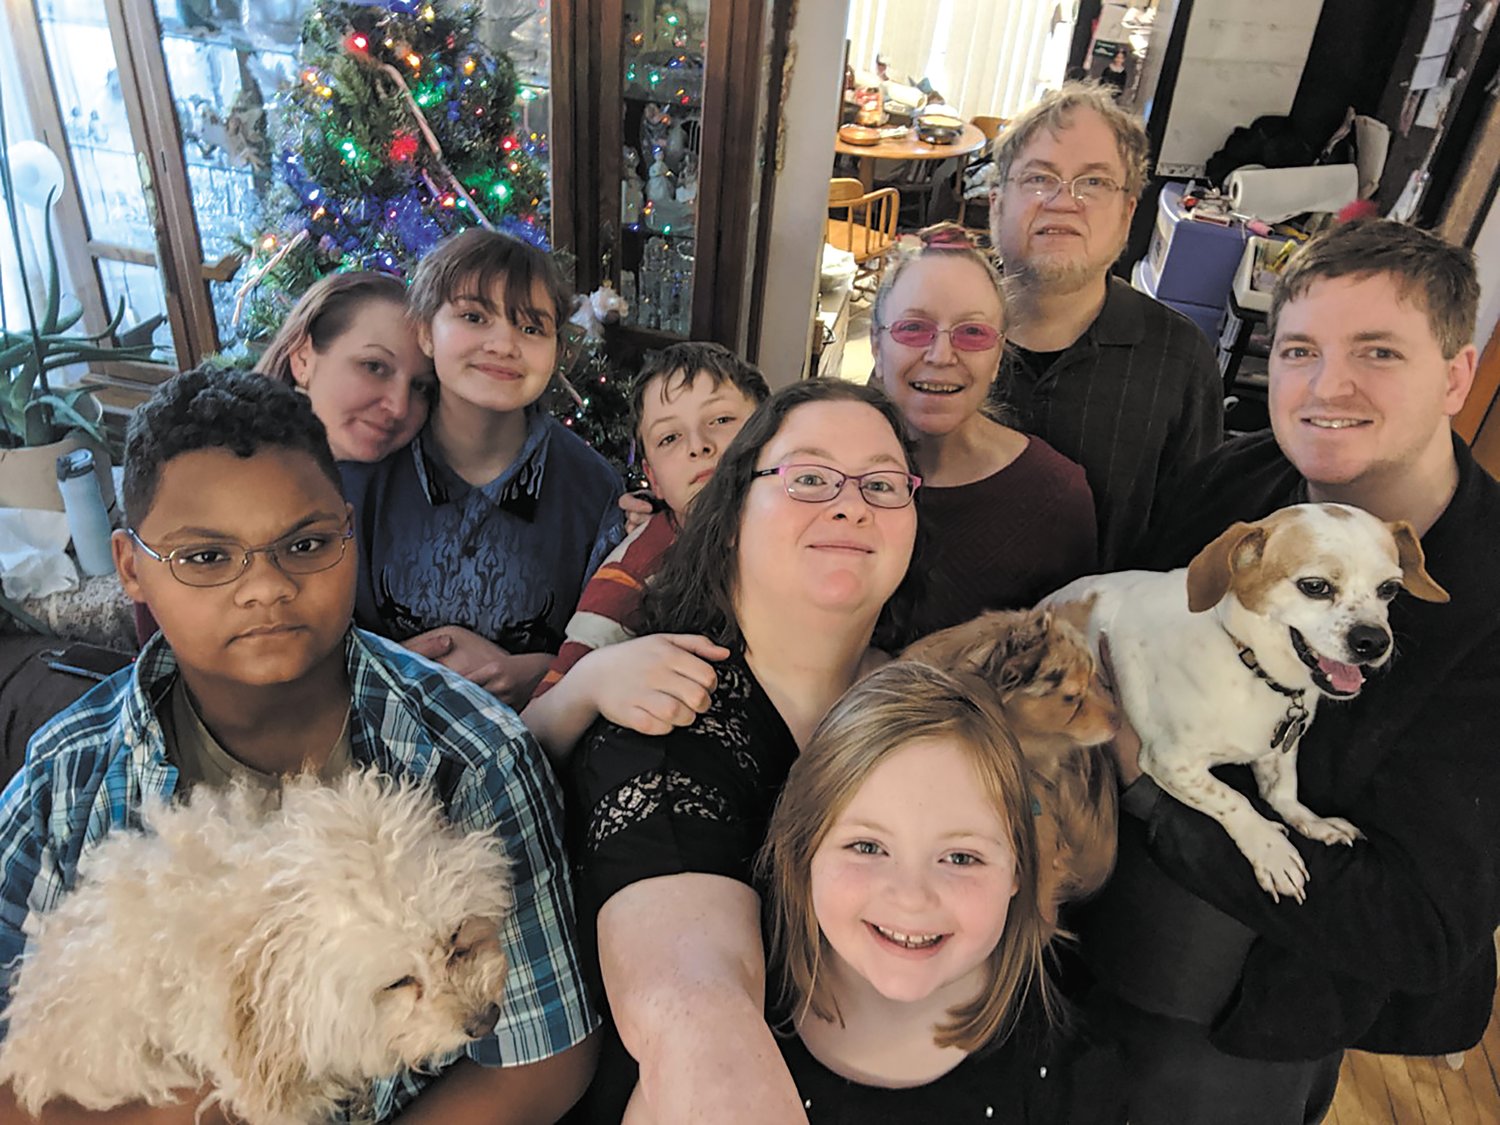 A Girard Christmas with parents Gerald "Teddy" and Terra, children Amanda and Tony (with his wife Lisa), and granchildren Loralei, 14, Greg, 16, Liam, 11, and Sonja, 8 (Photo submitted)